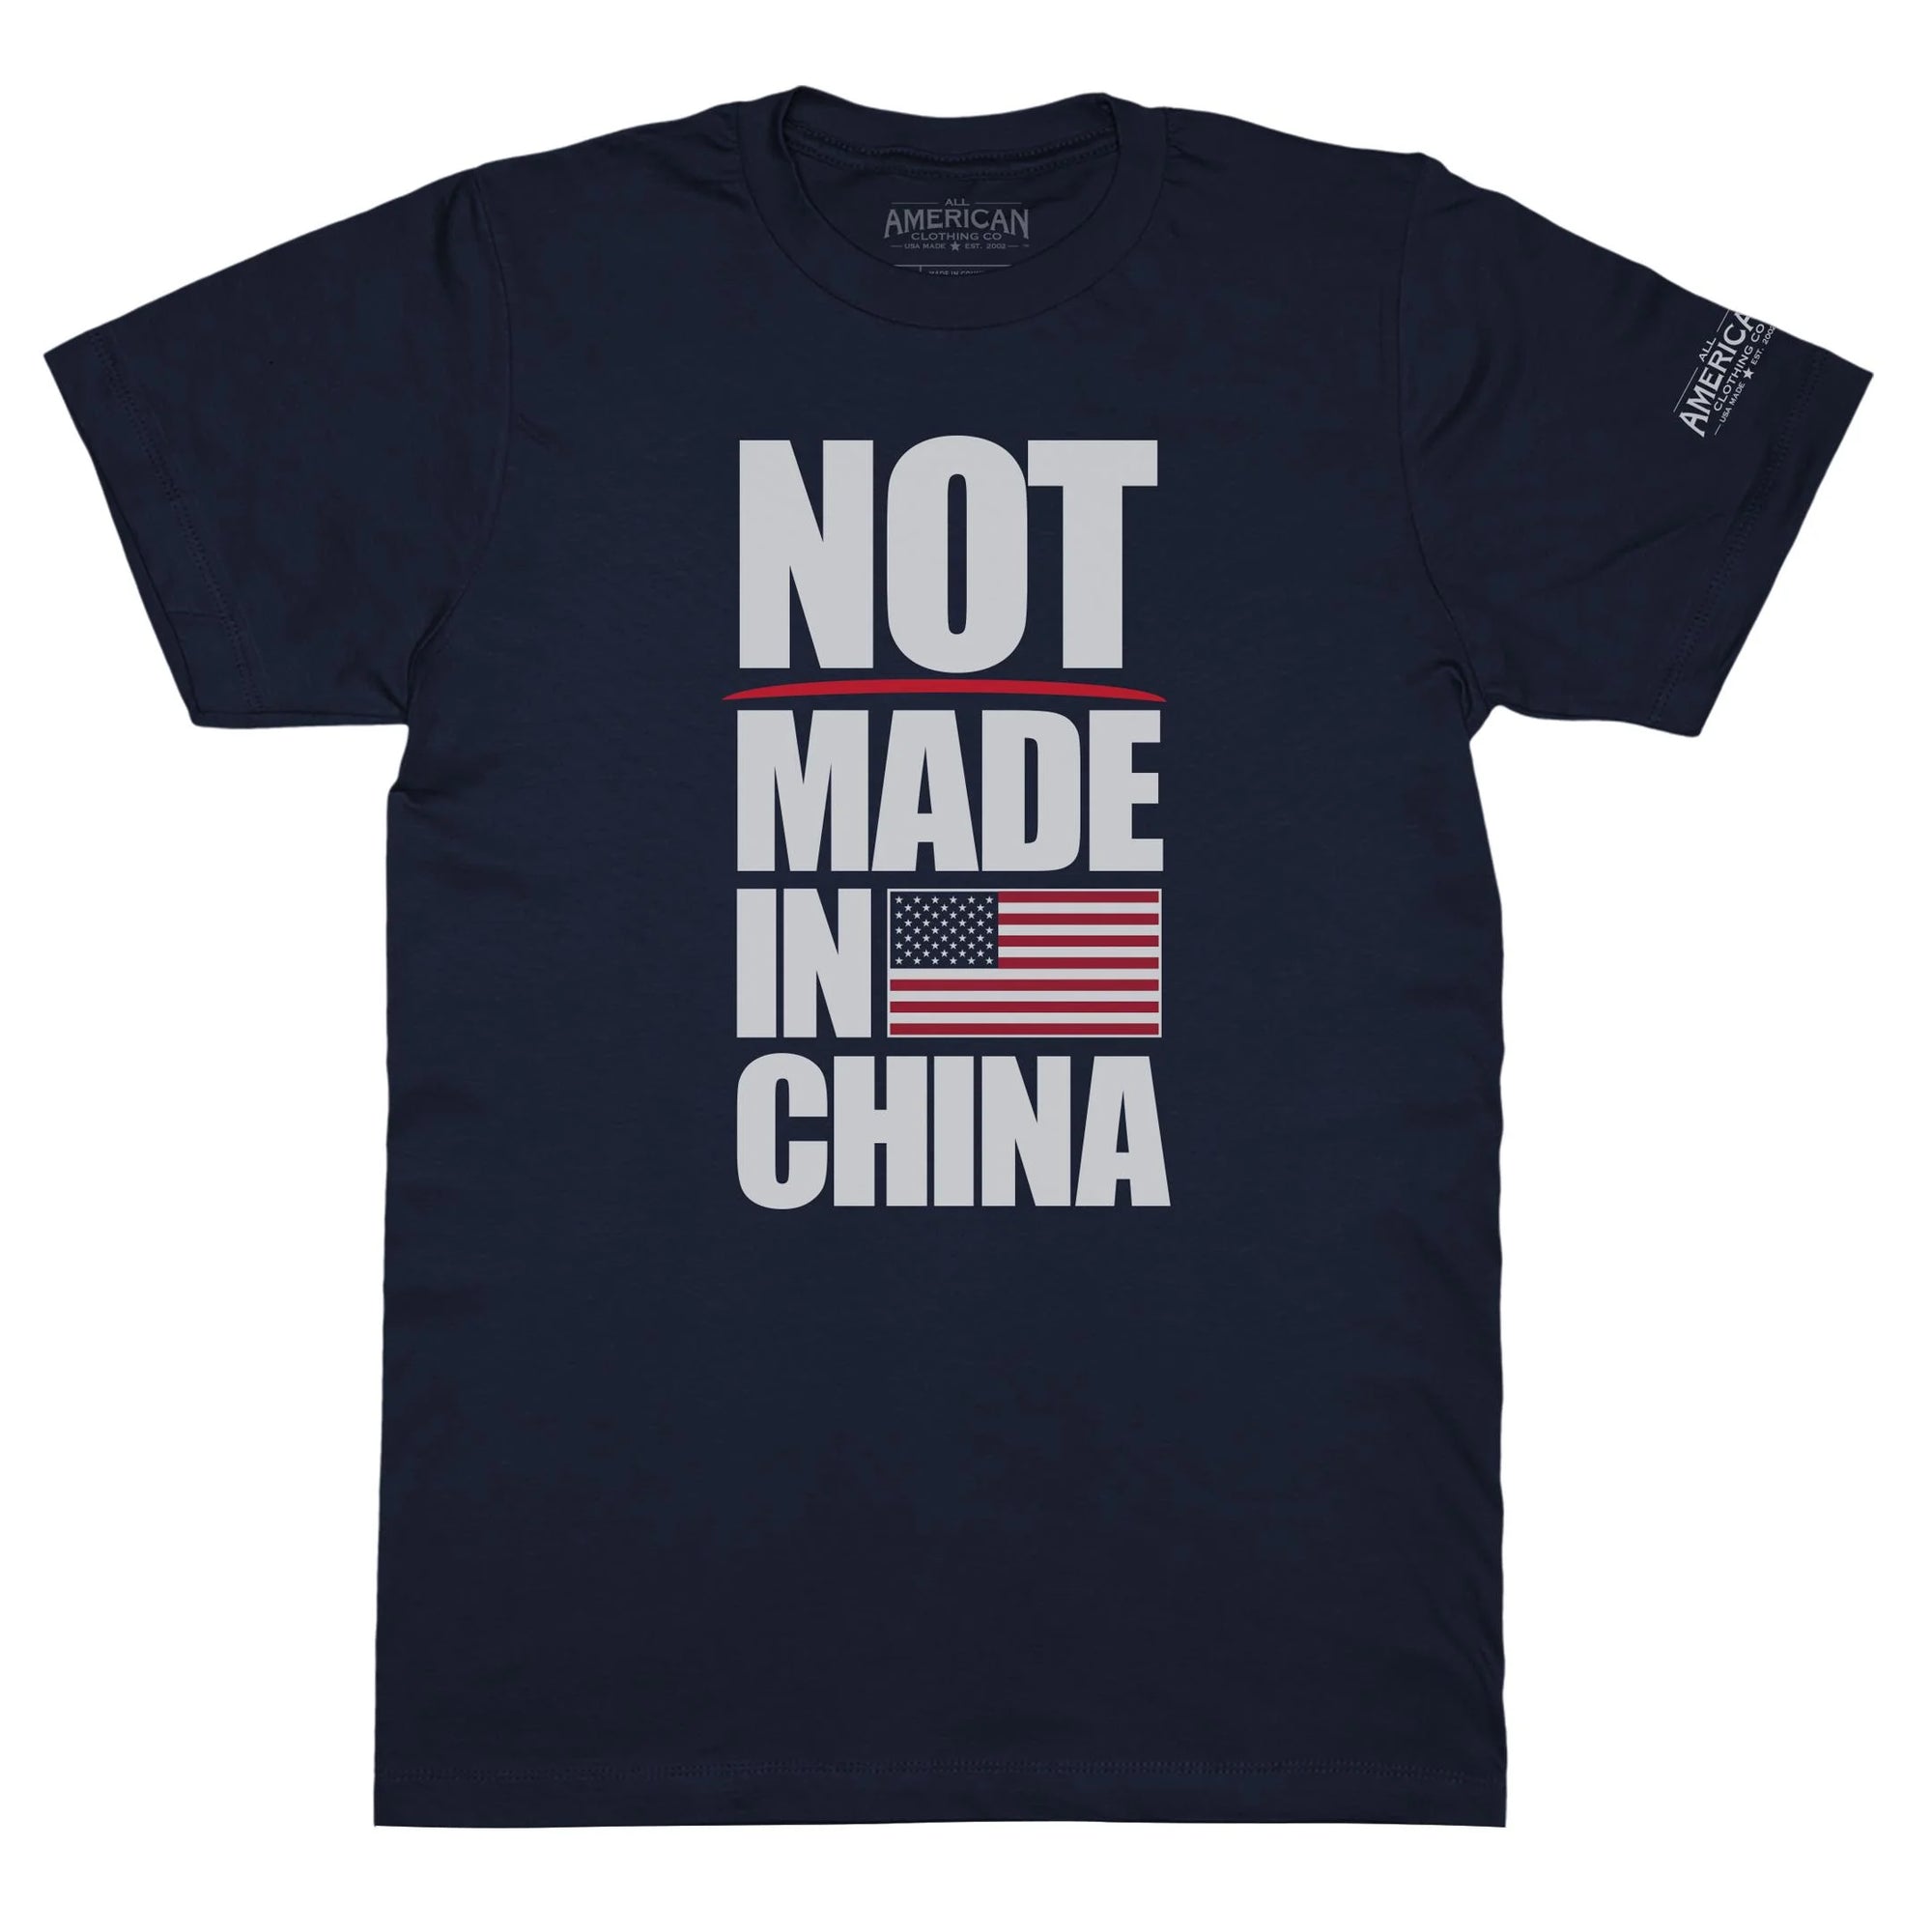 Not Made in China Graphic T-Shirt All American Clothing Co.